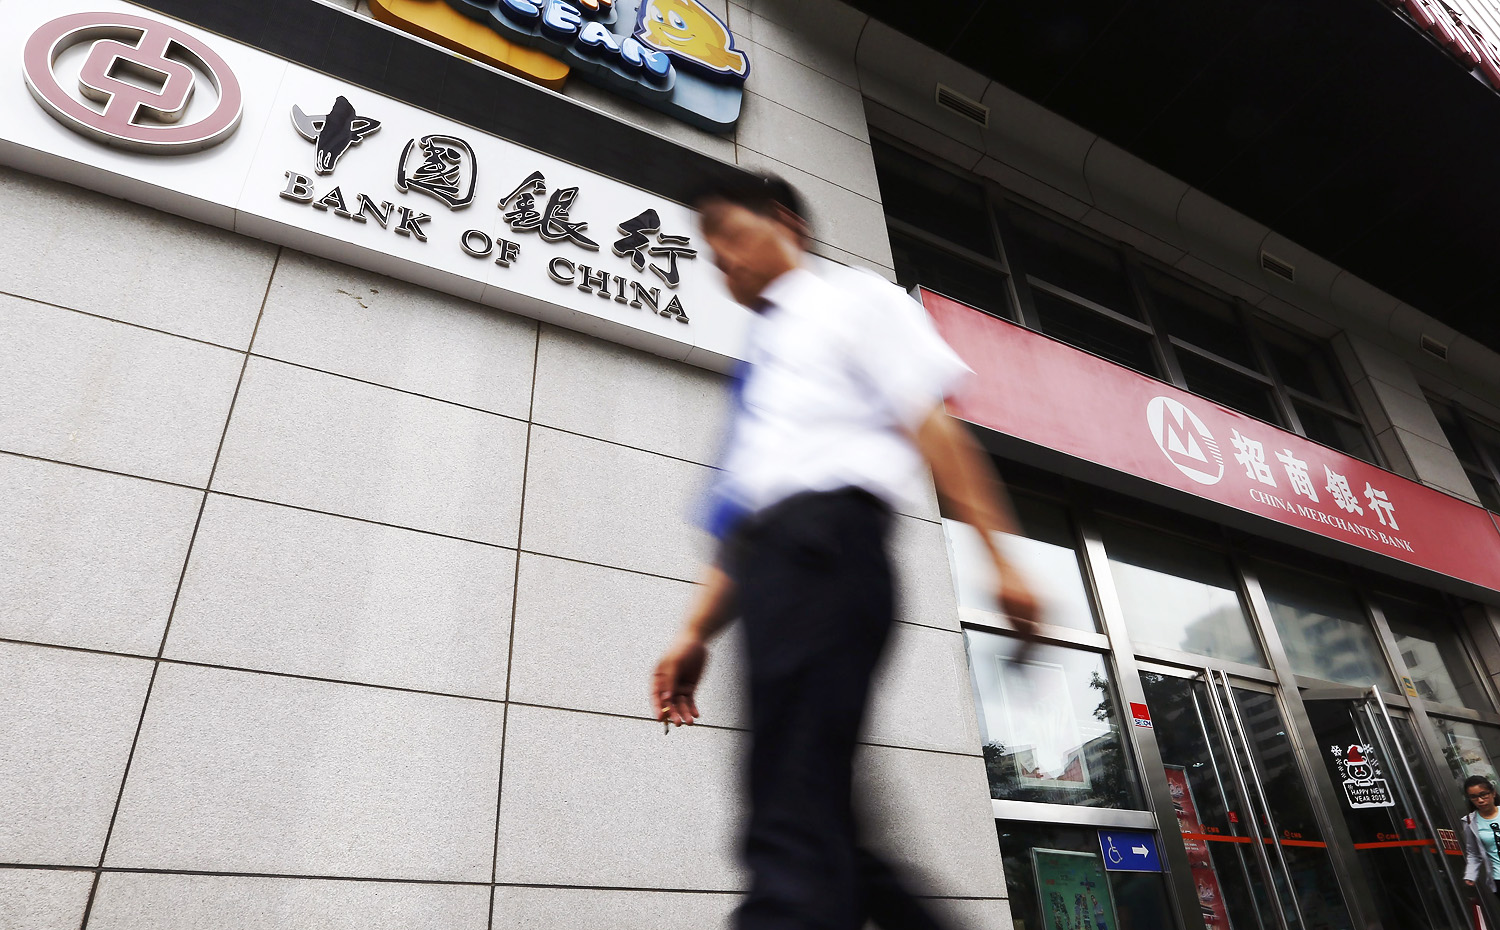 The People's Bank of China said the regulation has already been approved by the State Council, China's cabinet. Photo: EPA